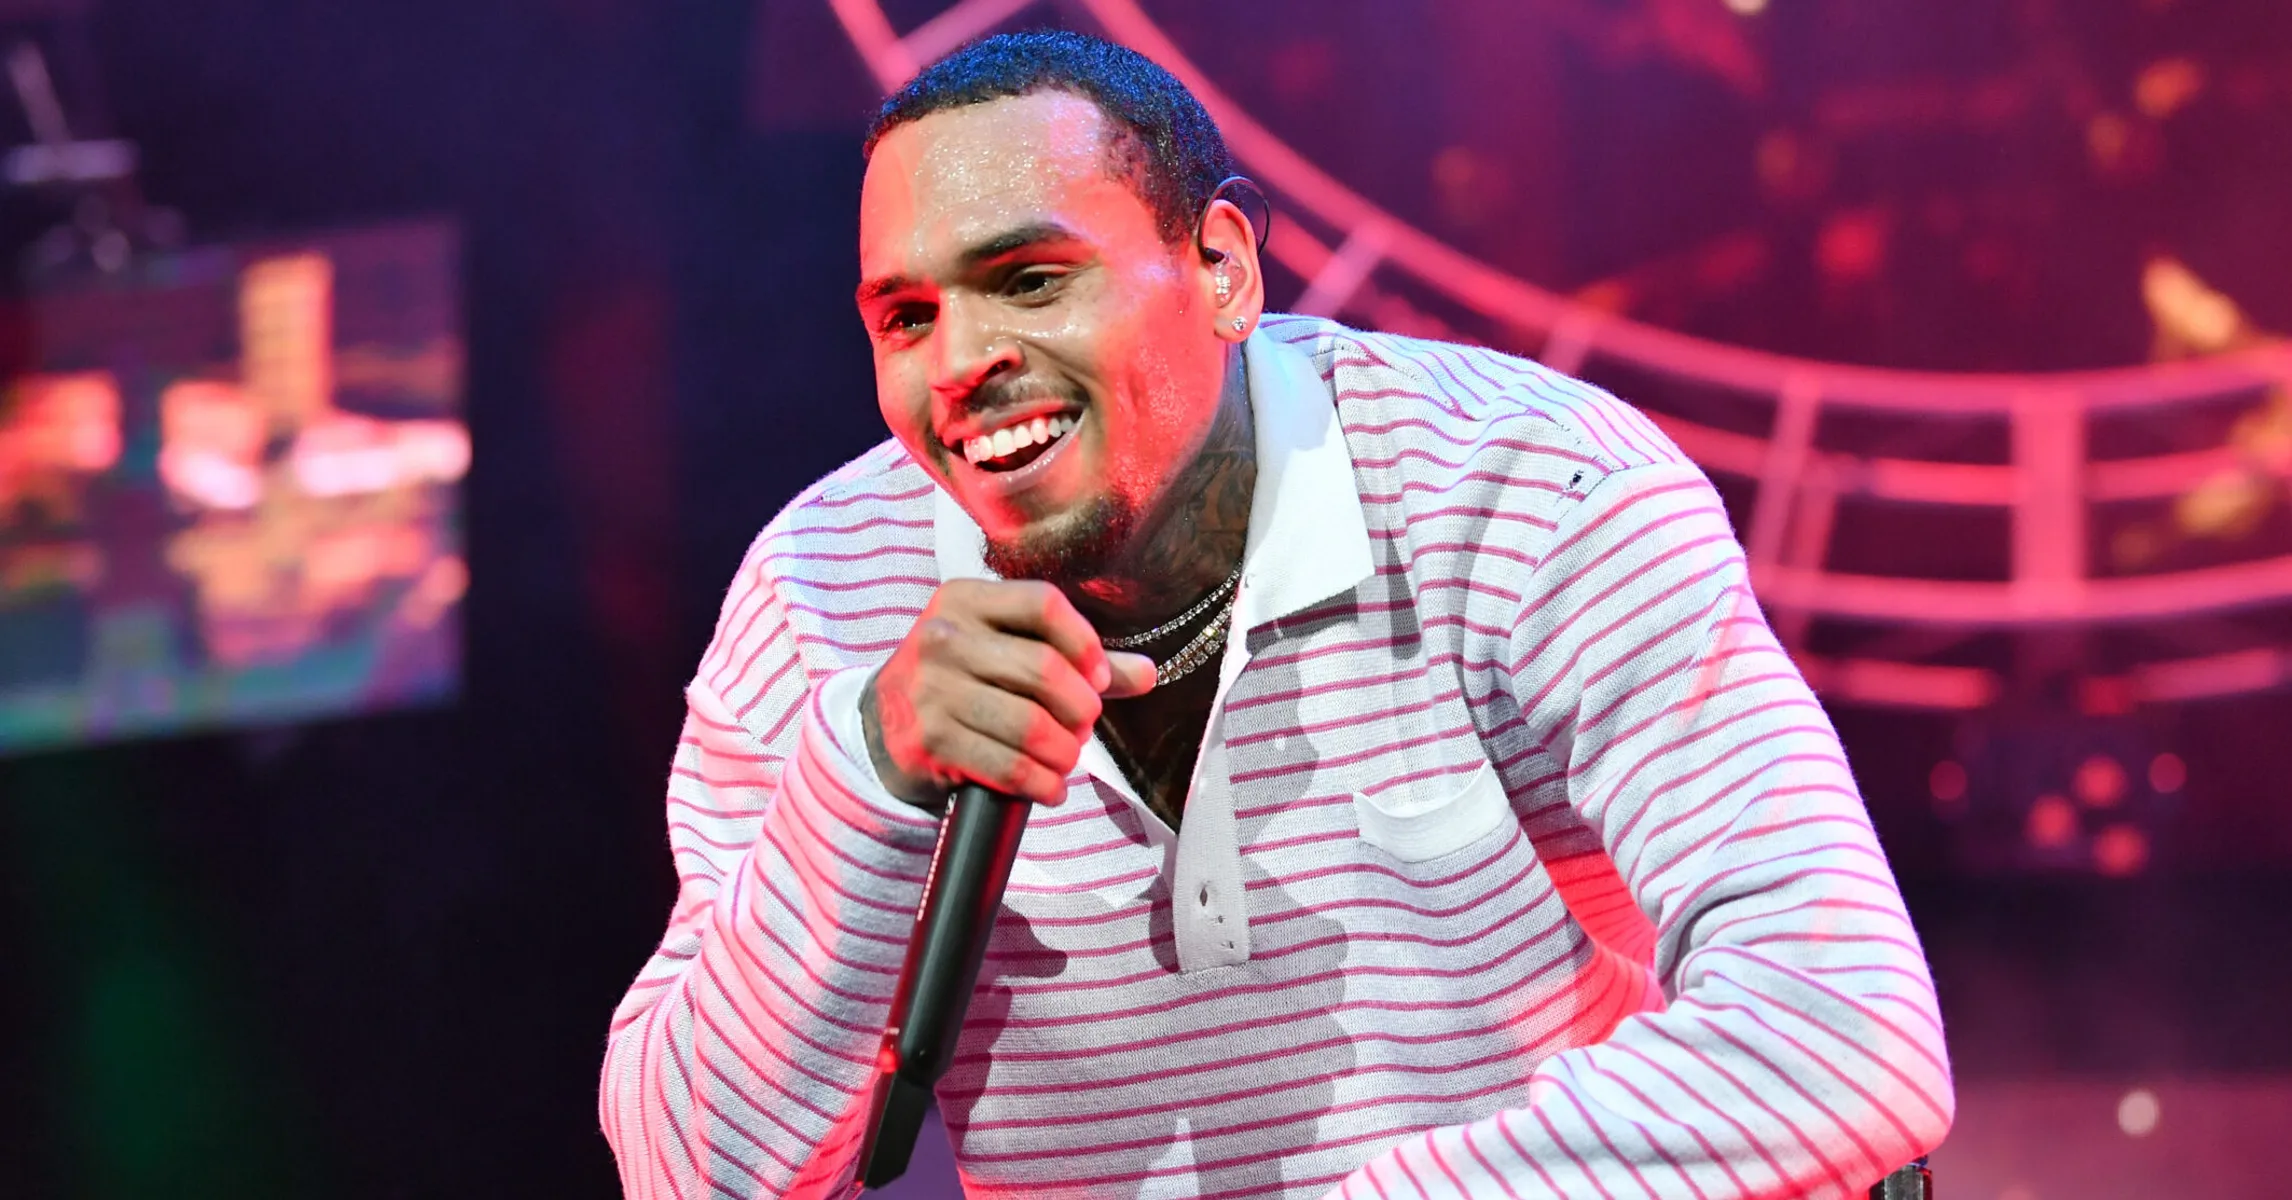 Chris Brown and Yella Beezy sued for assault after concert in Fort Worth